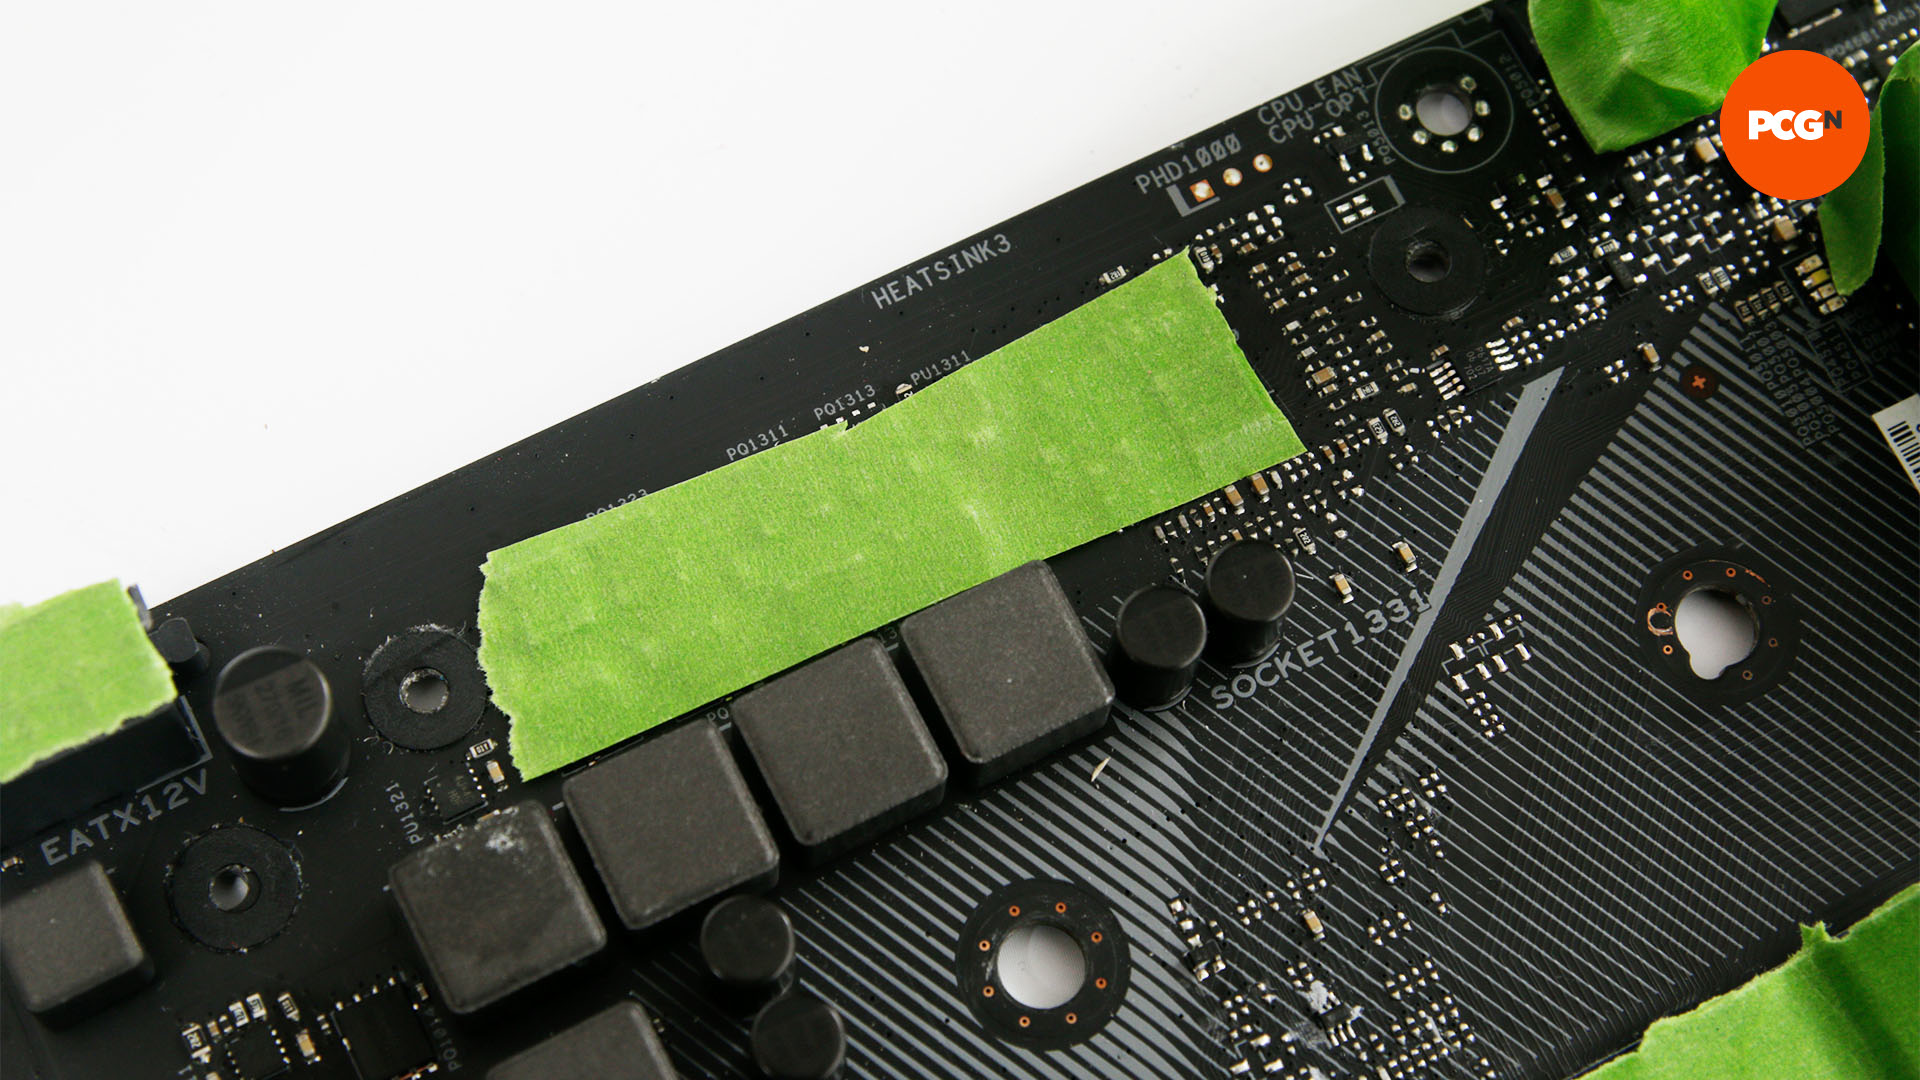 The heatsink contacts are masked with frog tape so that the motherboard painting can be done without damaging the contacts